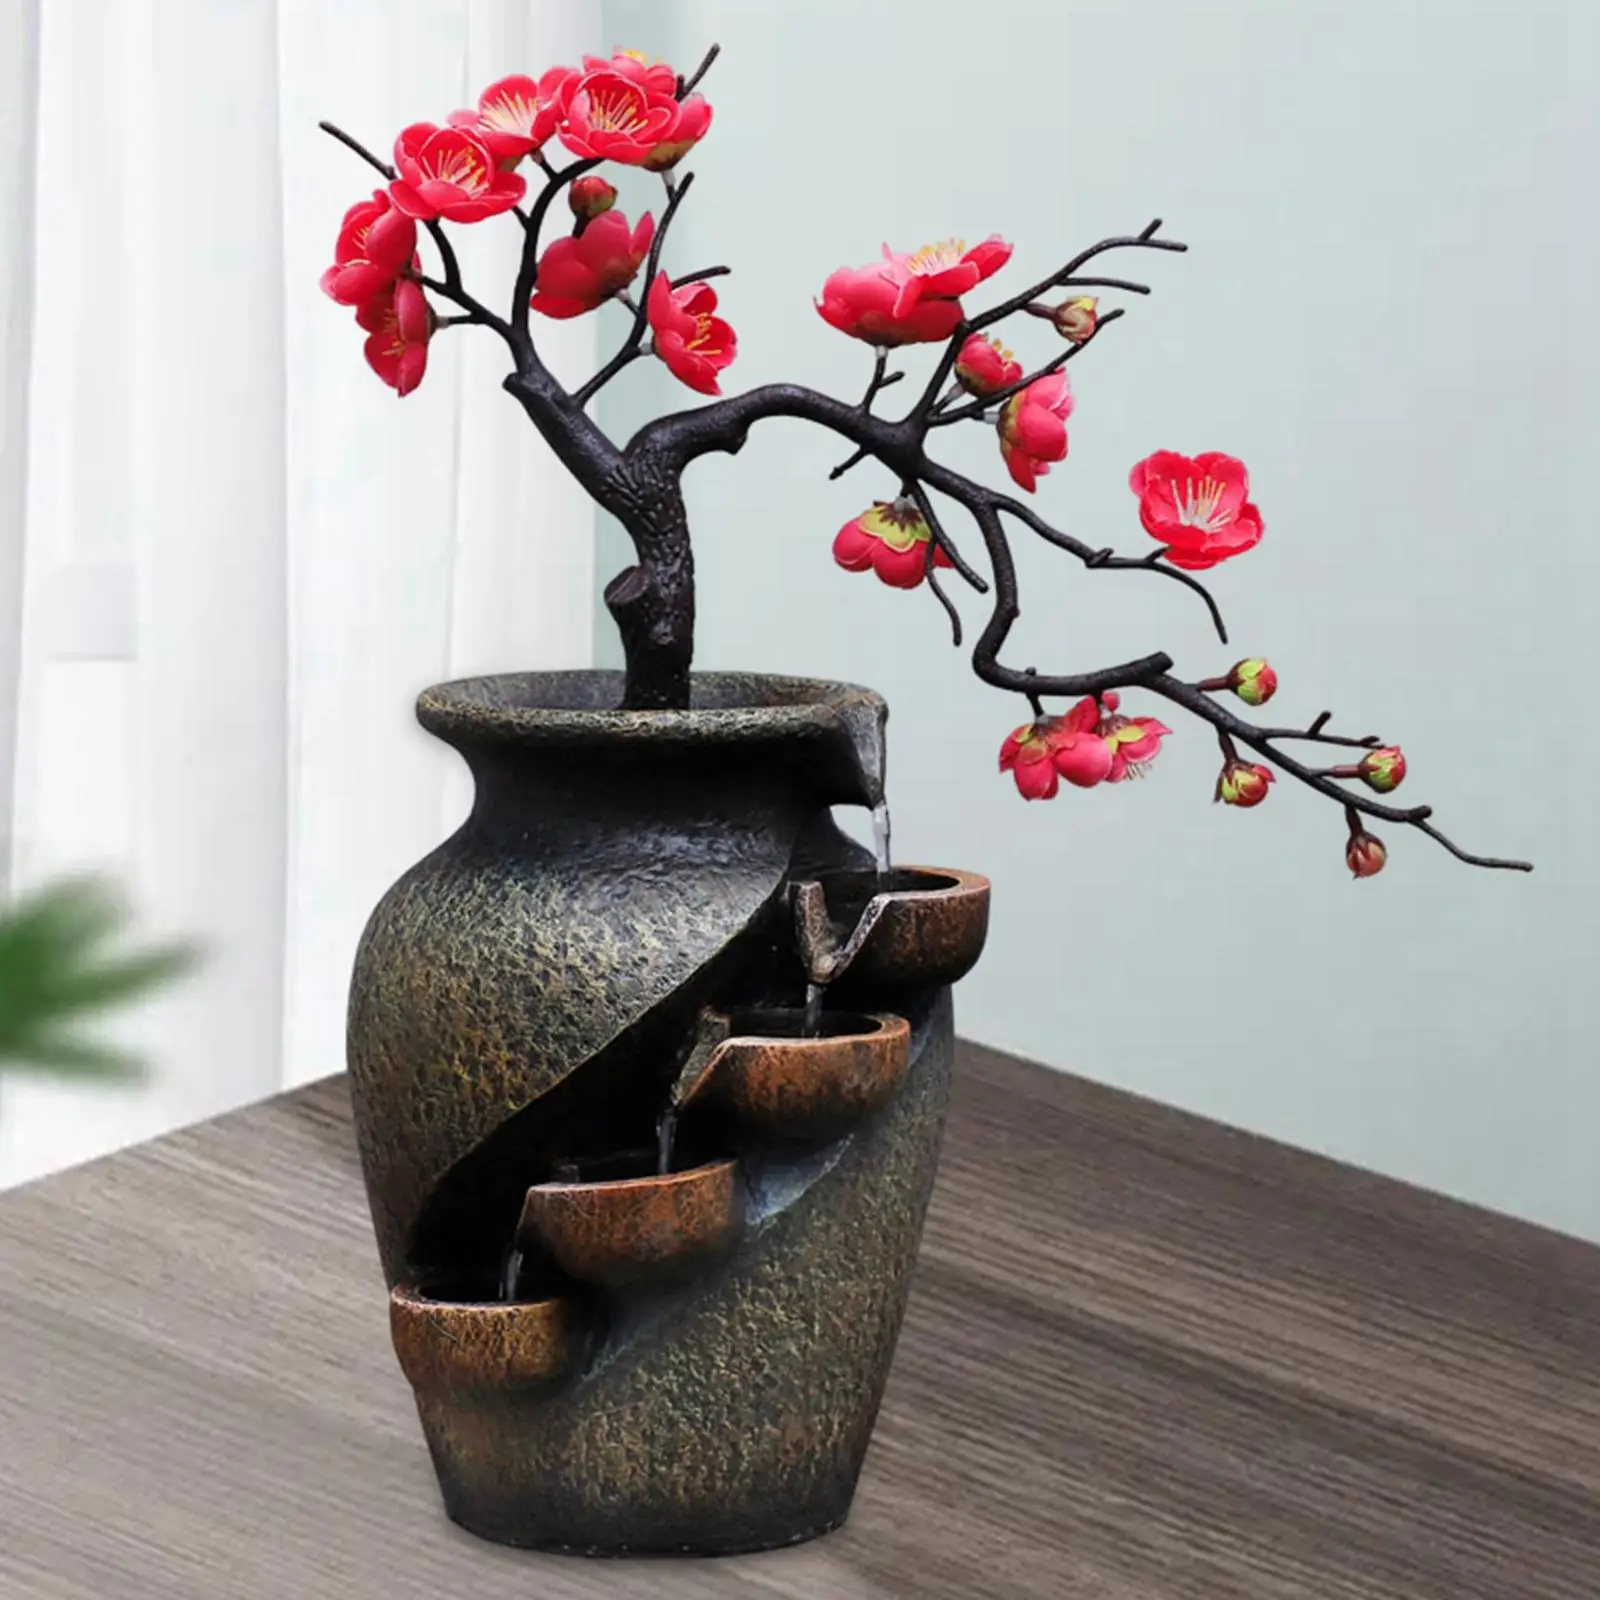 Creative Indoor Water Fountain Flower Vase Design Soothing Relaxation Landscape Ornament for Desktop SPA Garden Home Decorations